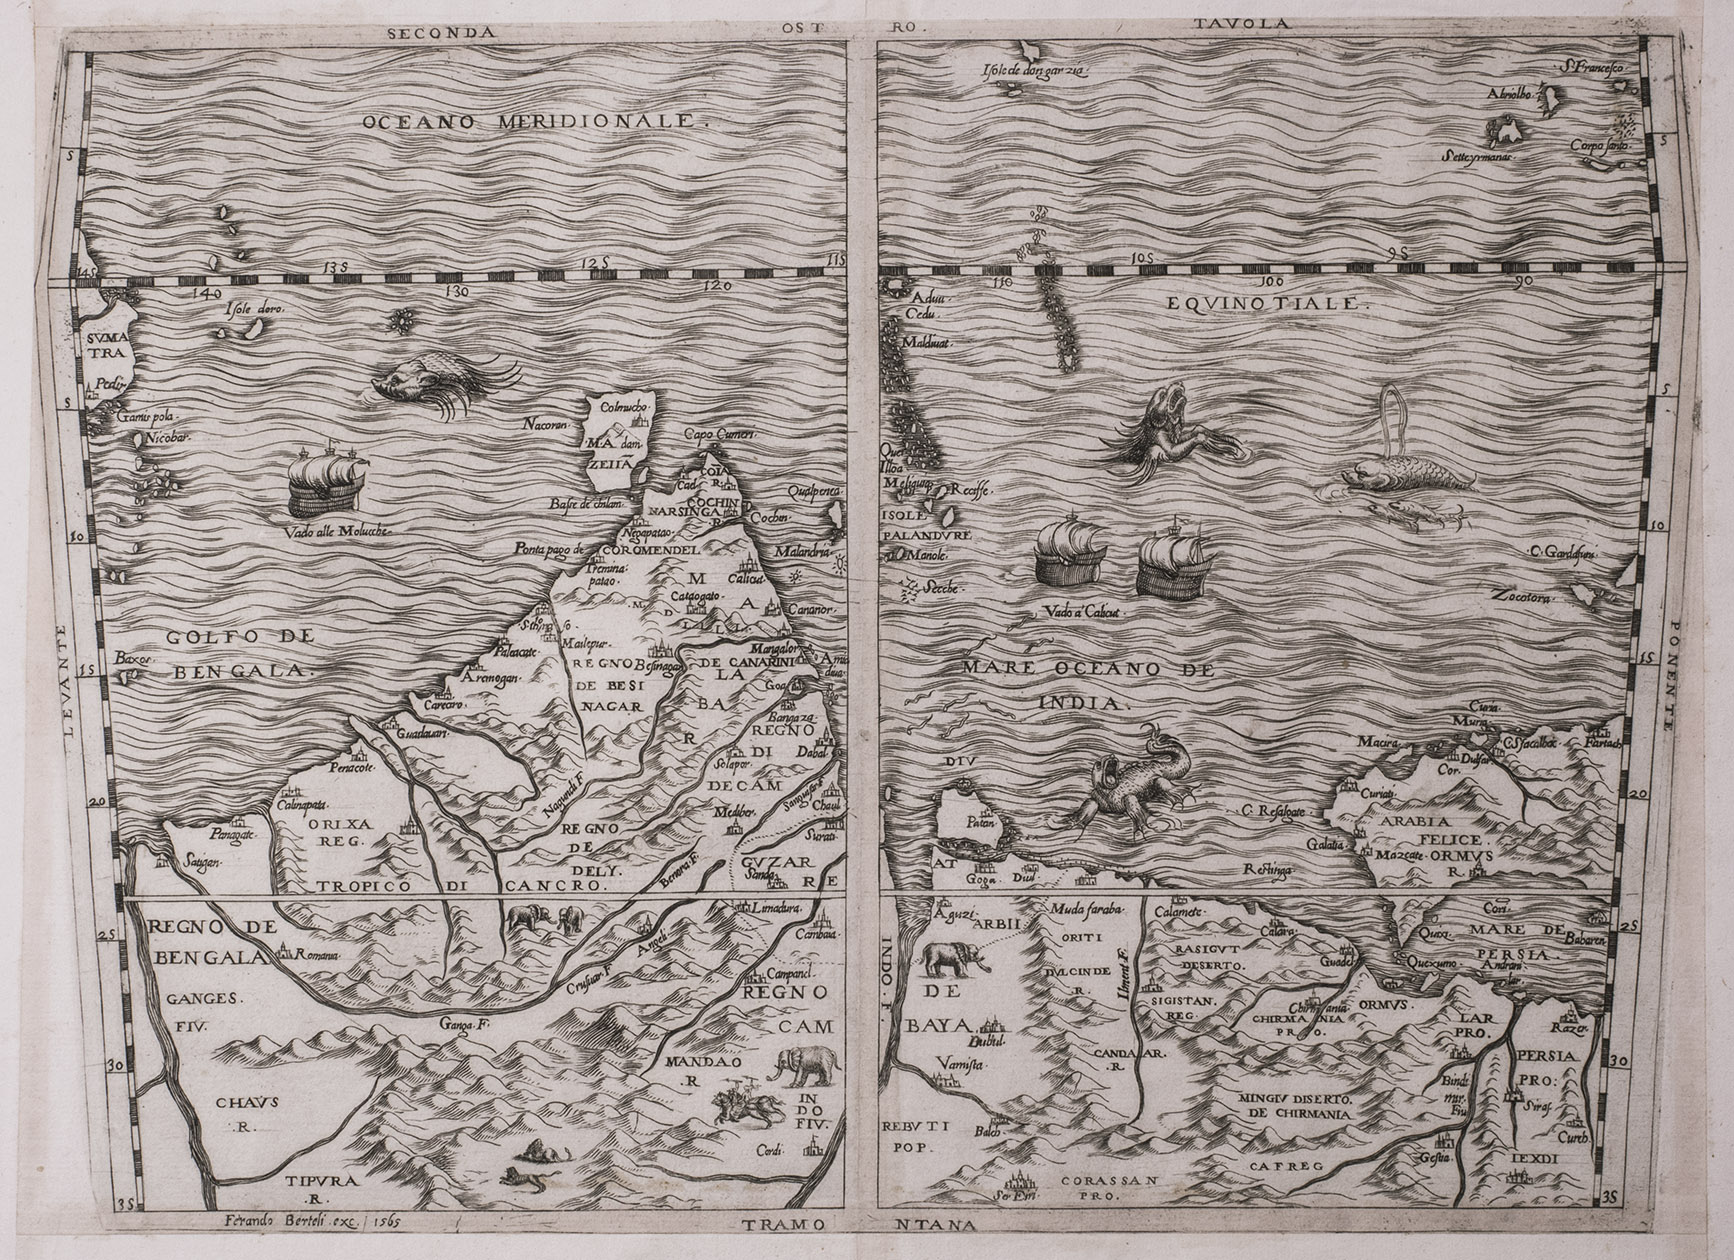 [GASTALDI, Giacomo]. - Seconda tavola.[Venice], Ferrando Bertelli, 1565 [printed ca. 1570]. Engraved map of the Indian Ocean, Indian subcontinent and most of the Gulf region (28 x 39 cm; margins extended to 50 x 66.5 cm), at a scale of about 1:13,500,000 with north at the foot, with 3 sea monsters, a spouting whale and 3 ships in the ocean; and on the land elephants, lions and 2 people on horseback carrying spears. Although printed from a single copper plate, the present map image is divided into two parts, with a 7 mm gap between the right and left halves, so that nothing would be lost if the map were bound as a double-page plate.